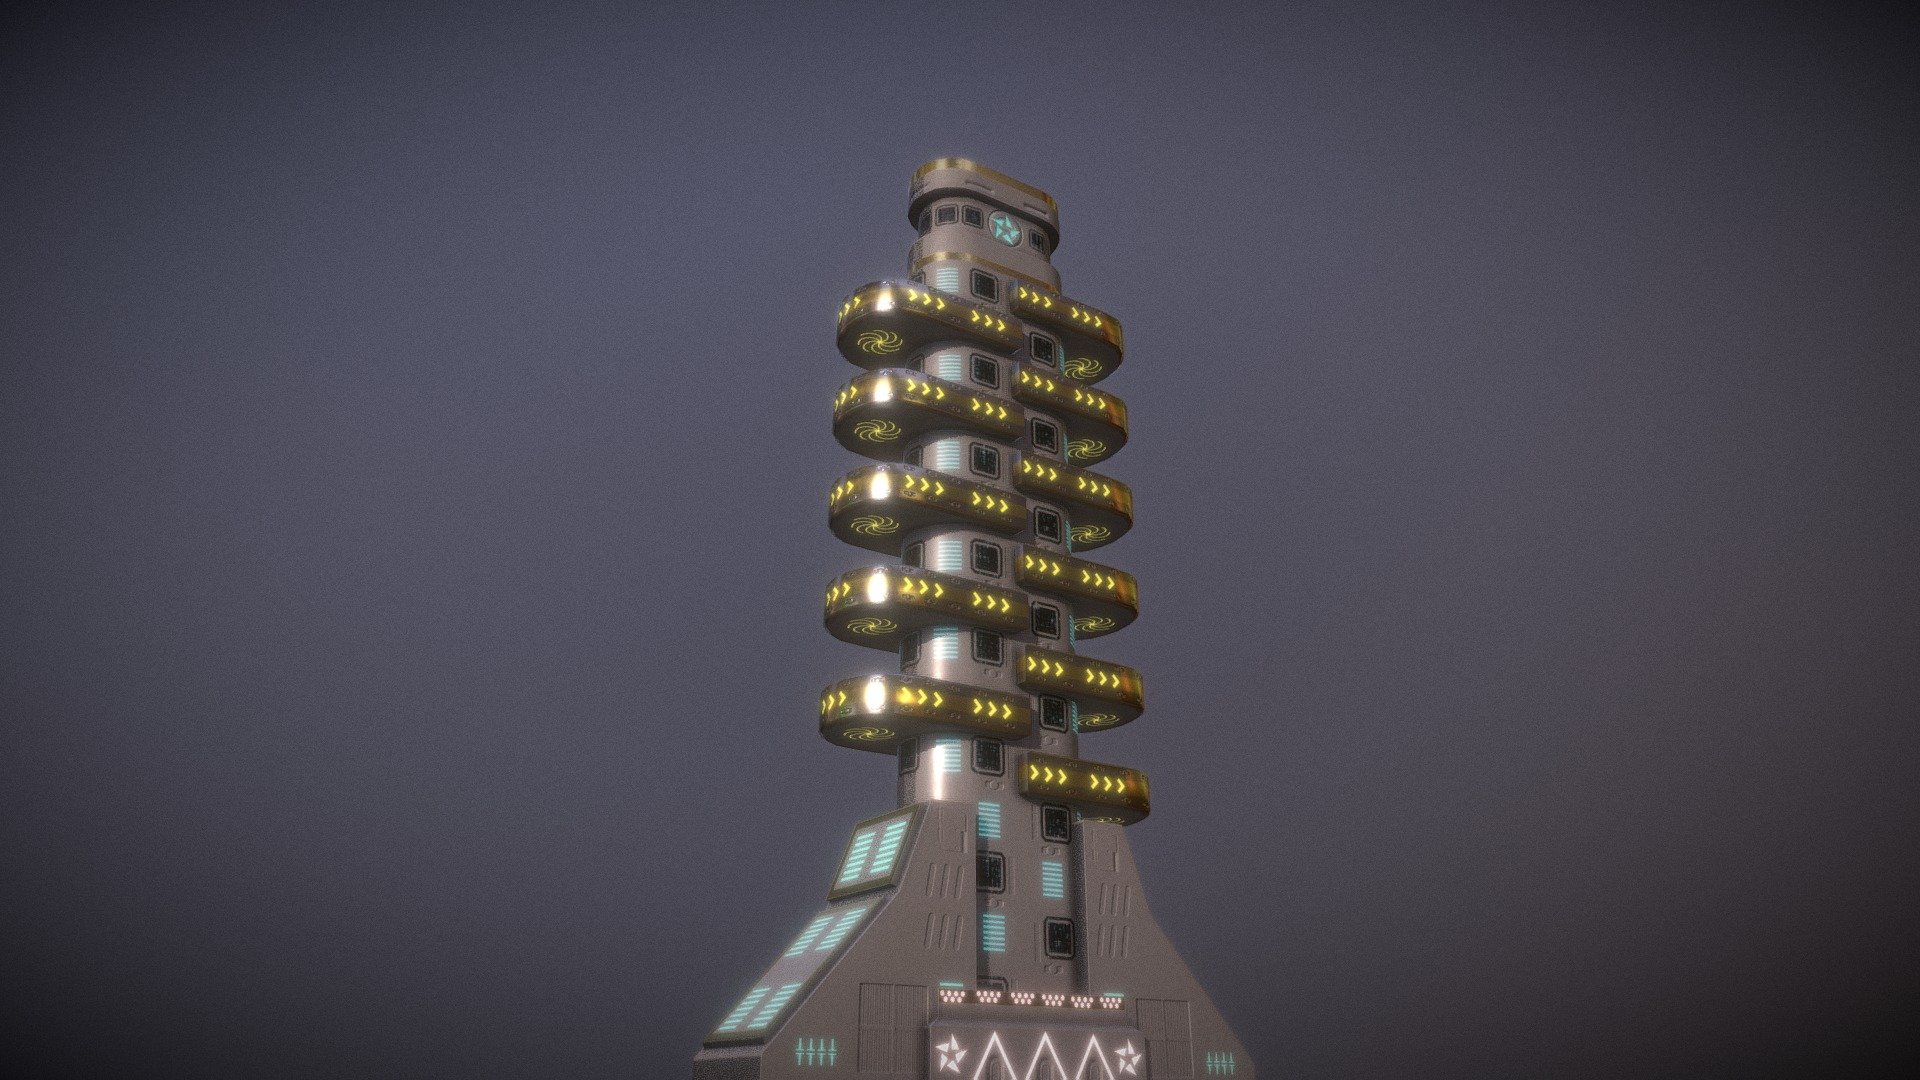 This building is a part of my Sci-Fi project that utilizes a modular build 3d model